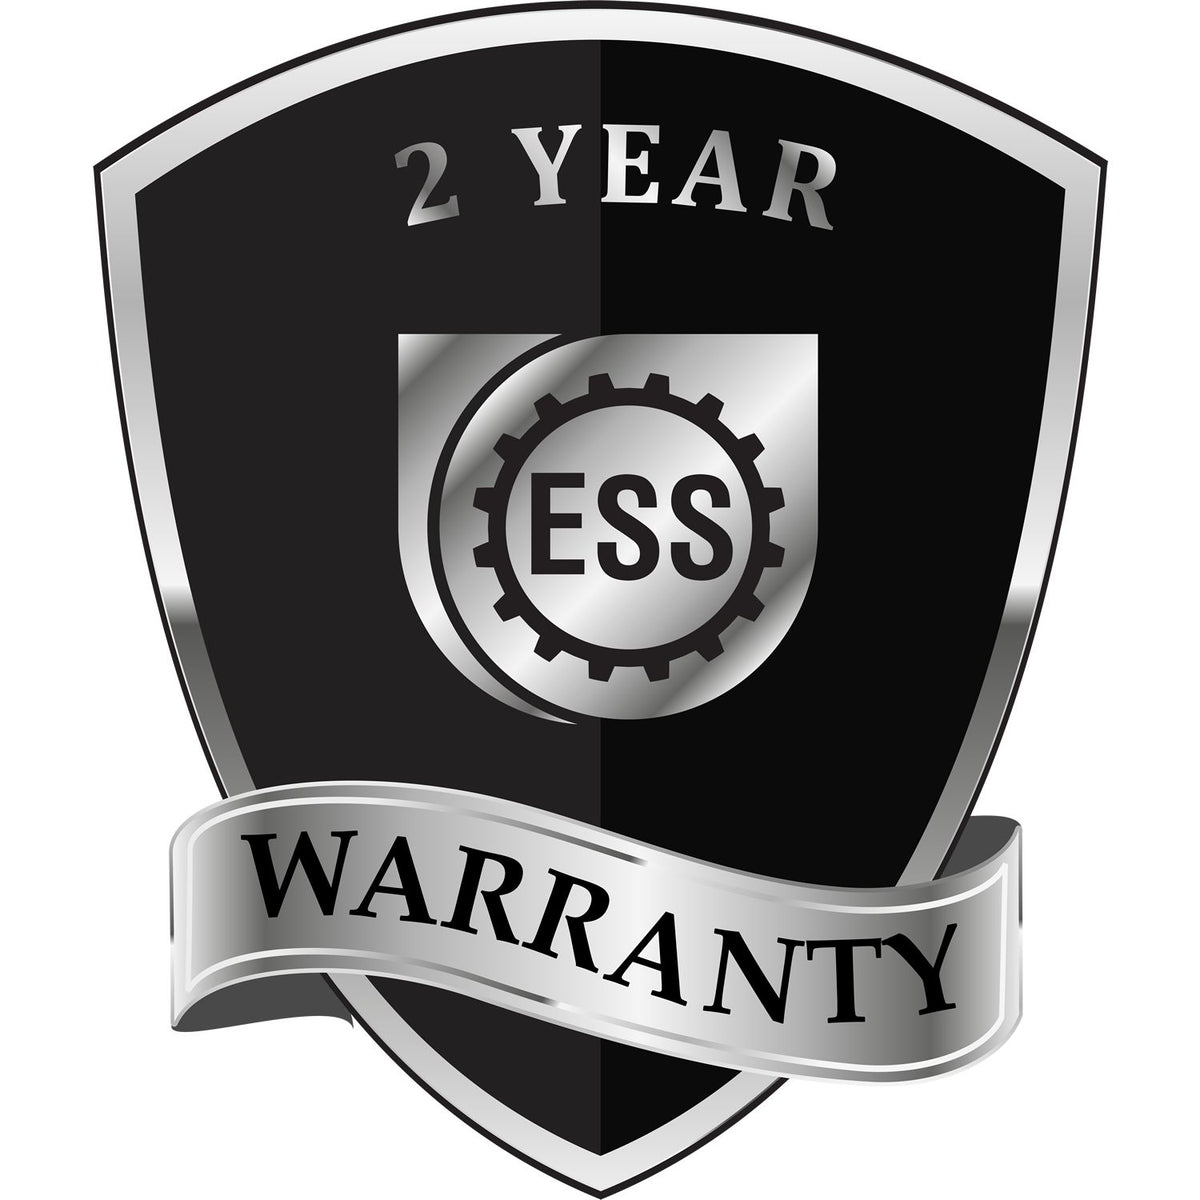 A black and silver badge or emblem showing warranty information for the Hybrid Florida Geologist Seal